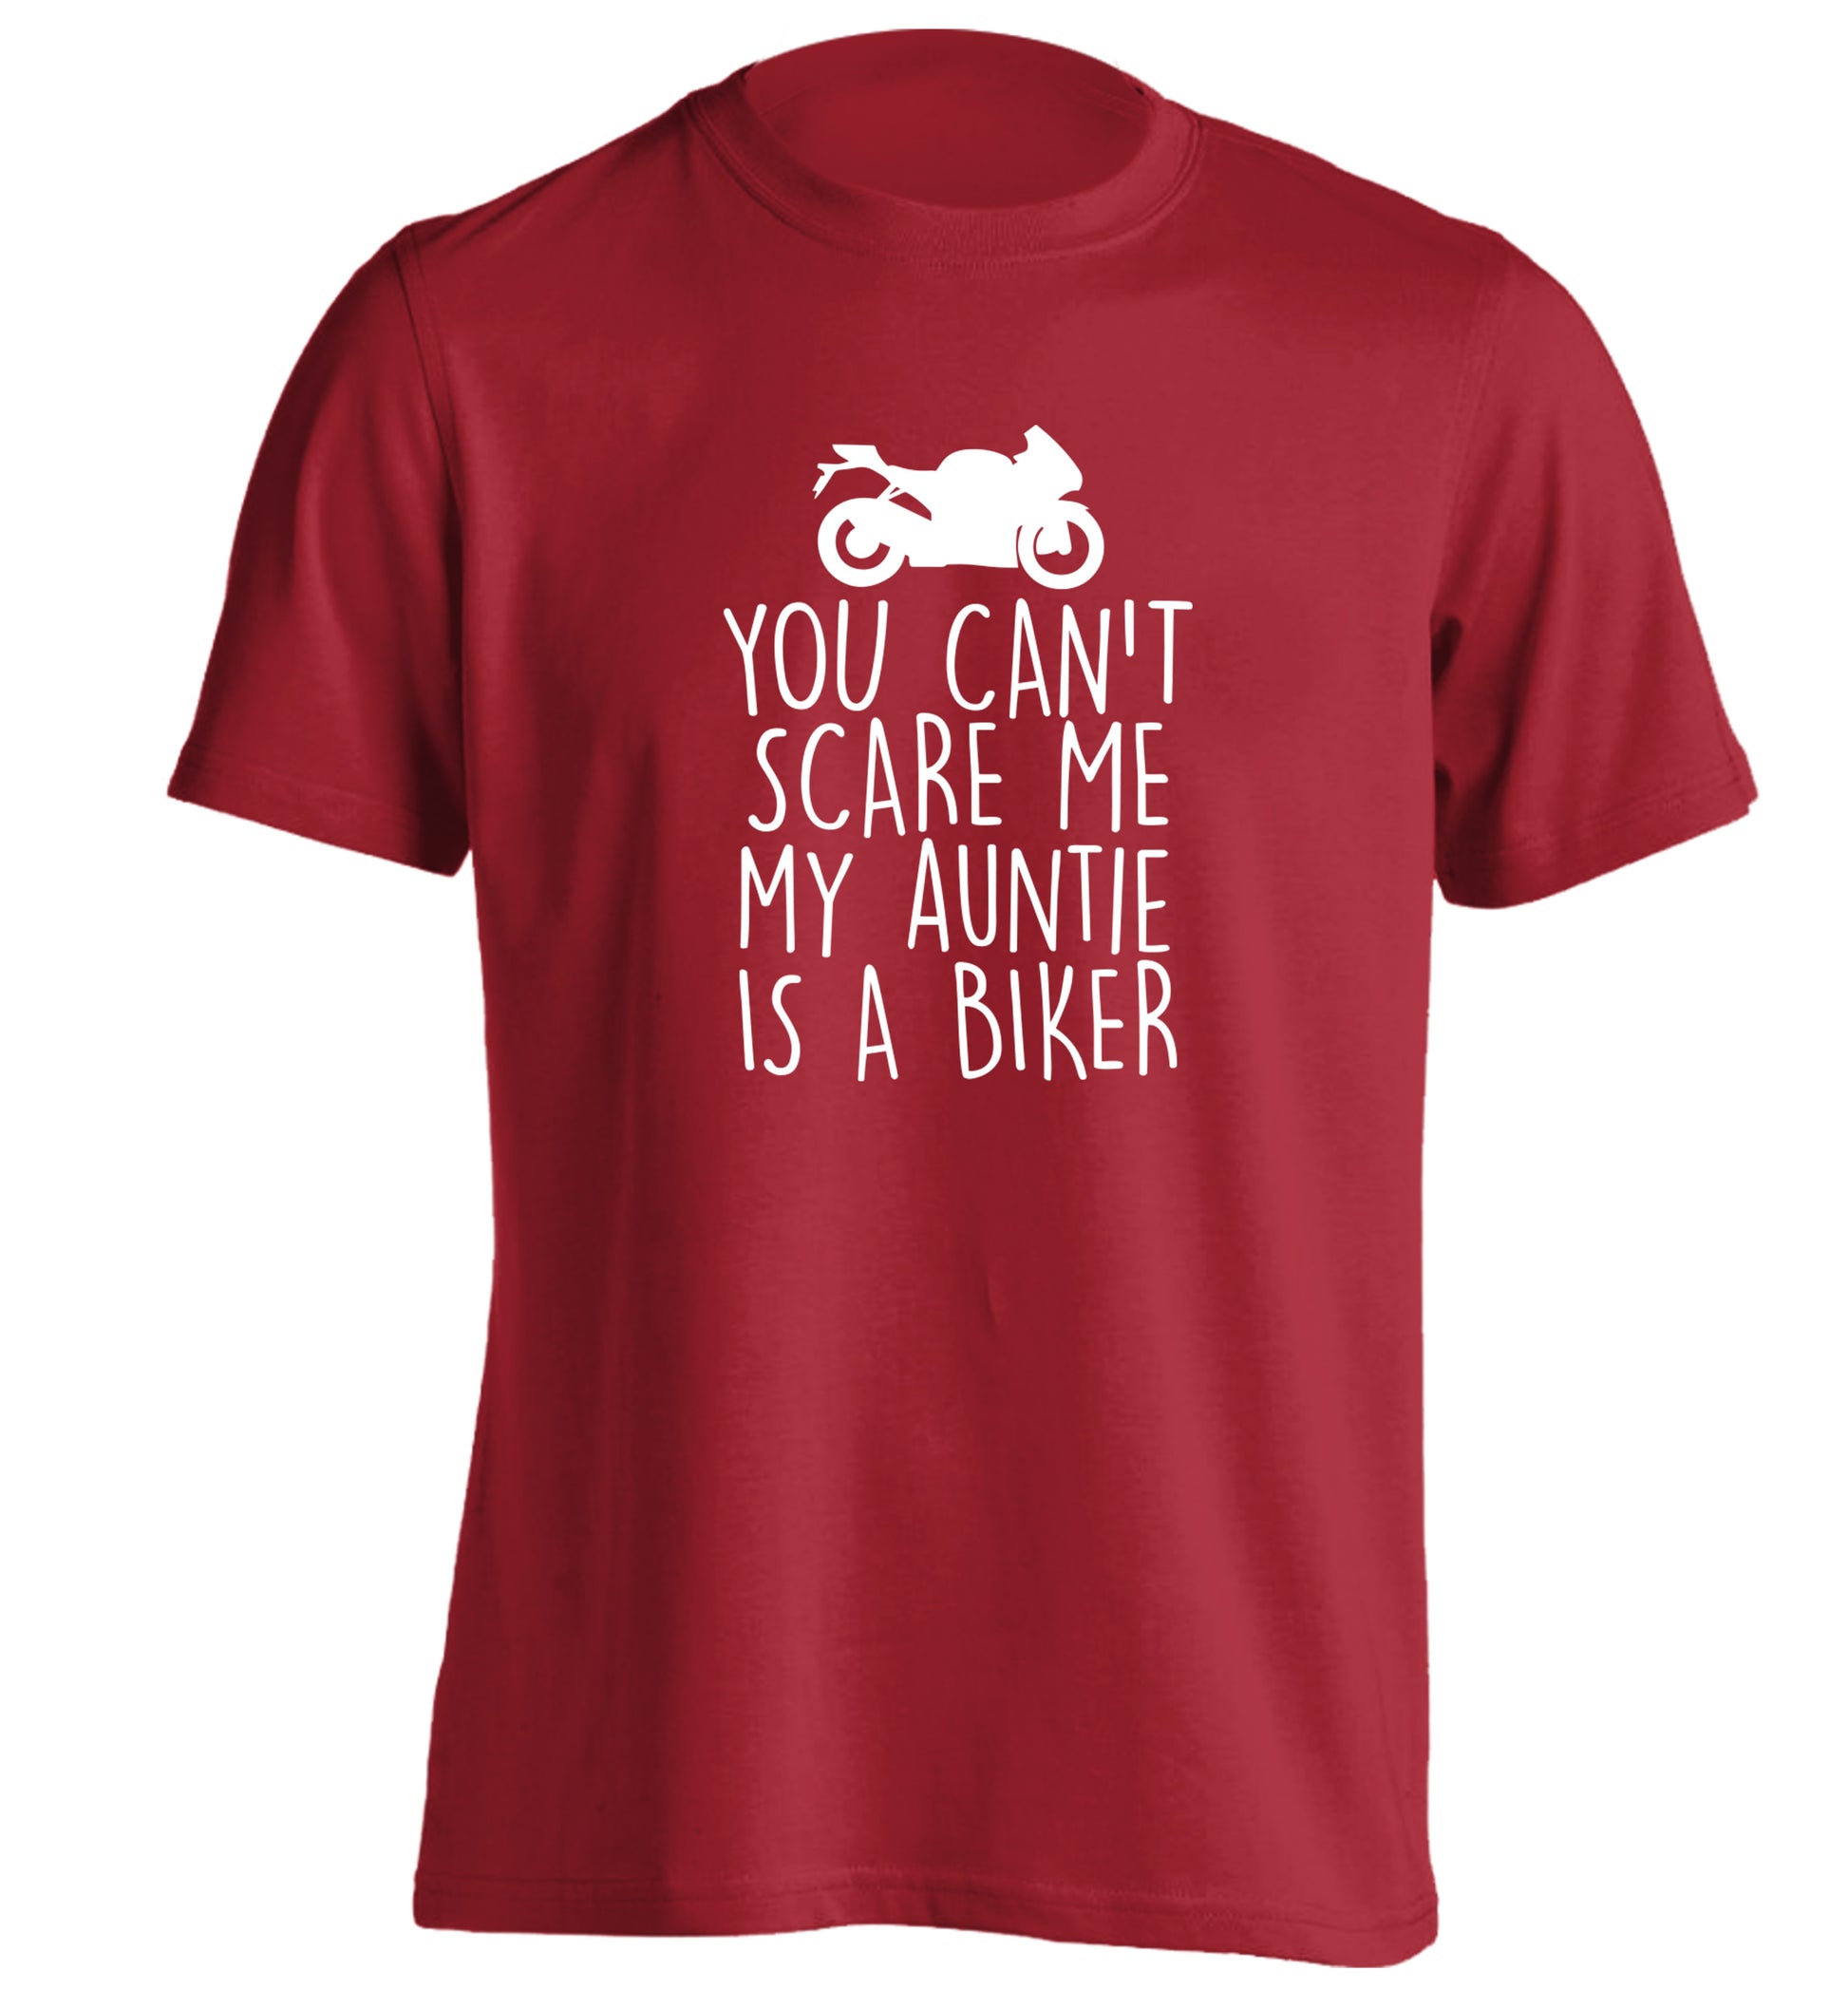 You can't scare me my auntie is a biker adults unisex red Tshirt 2XL